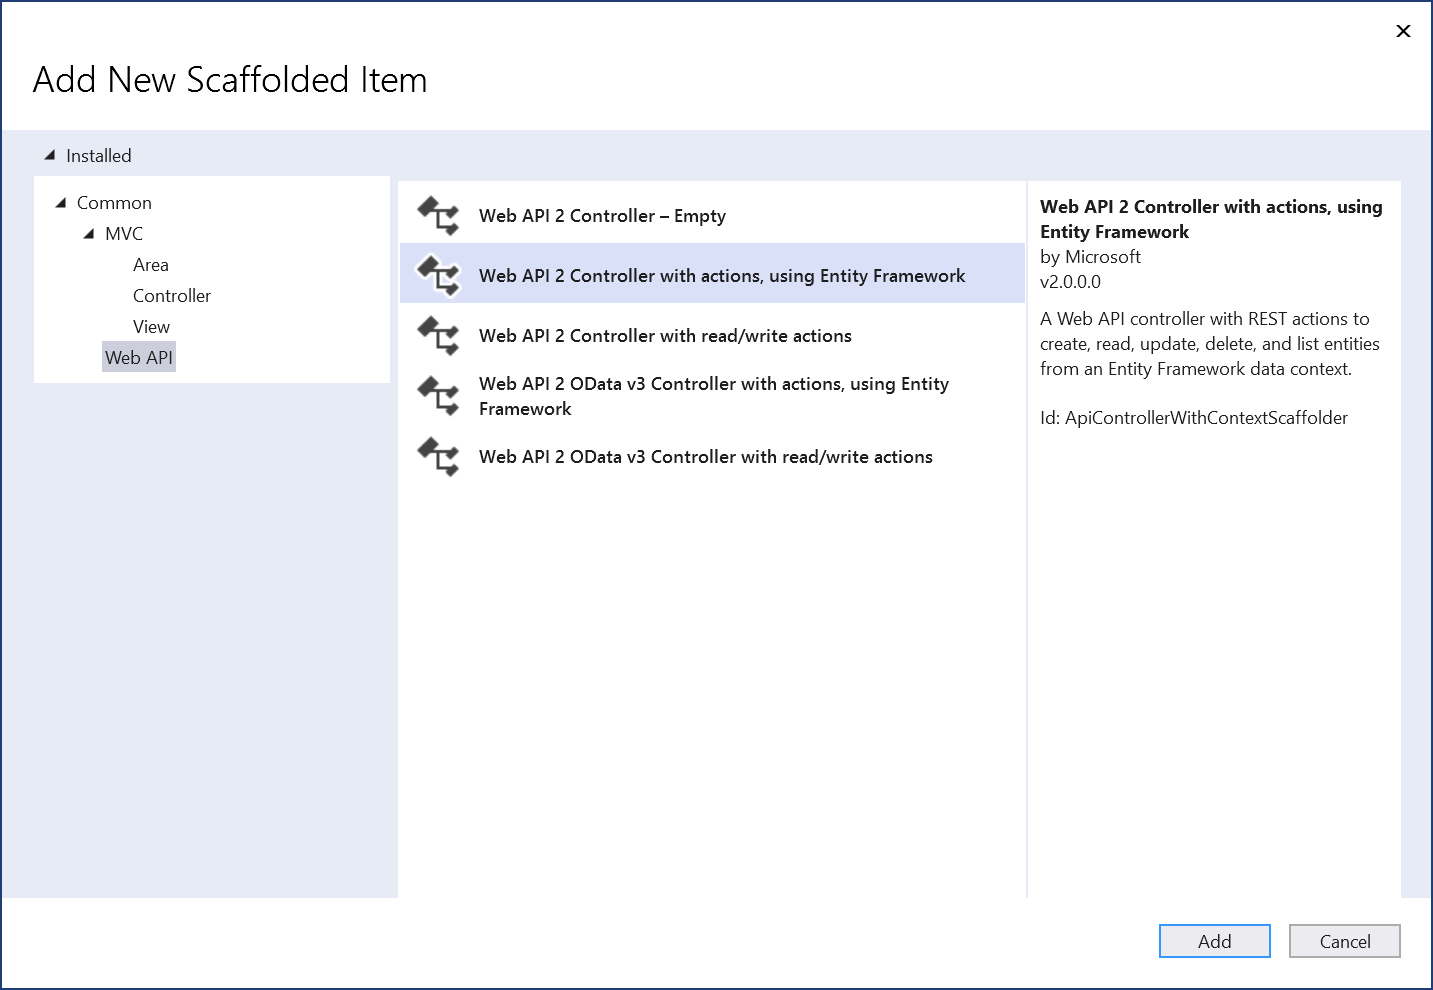 Add New Scaffolded Item - Web API 2 Controller With Actions, Using Entity Framework